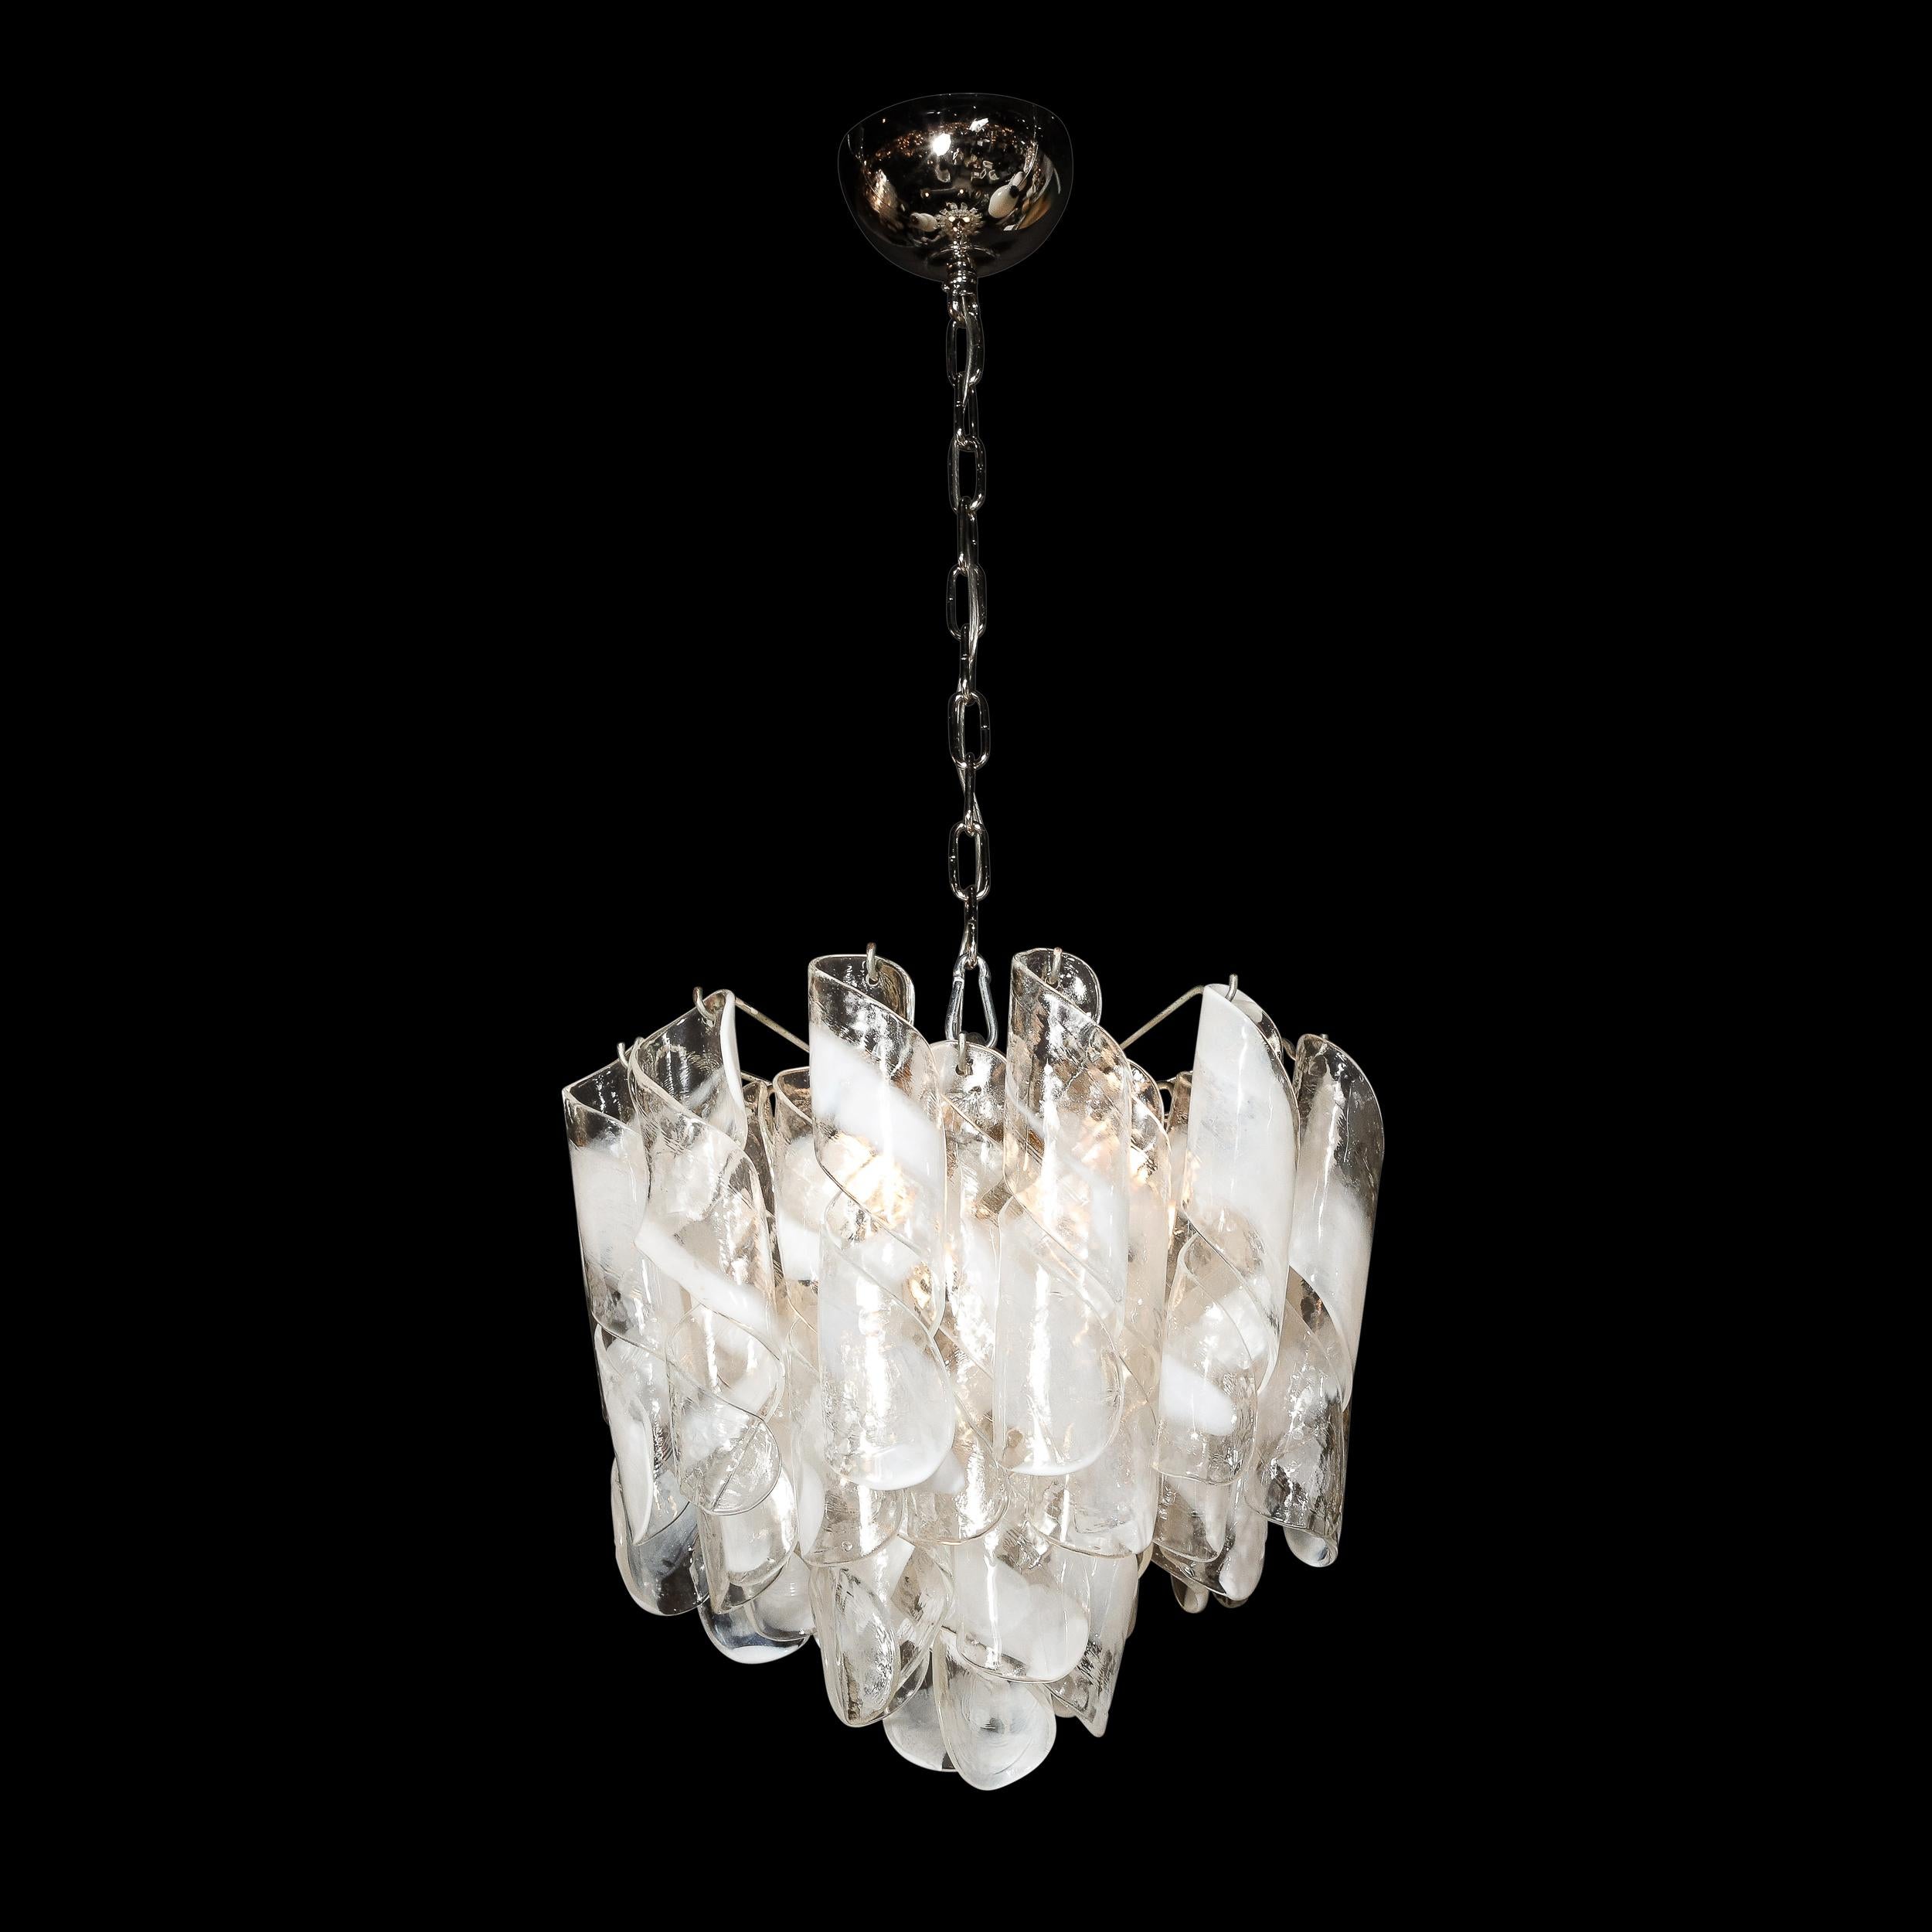 This highly elegant and dynamic Mid-Century Modernist Hand-Blown Murano Glass Torciglioni Chandelier is by Mazzega and originates from Italy, Circa 1970. A well proportioned and excellent quality fixture, this piece features Hand-Blown 